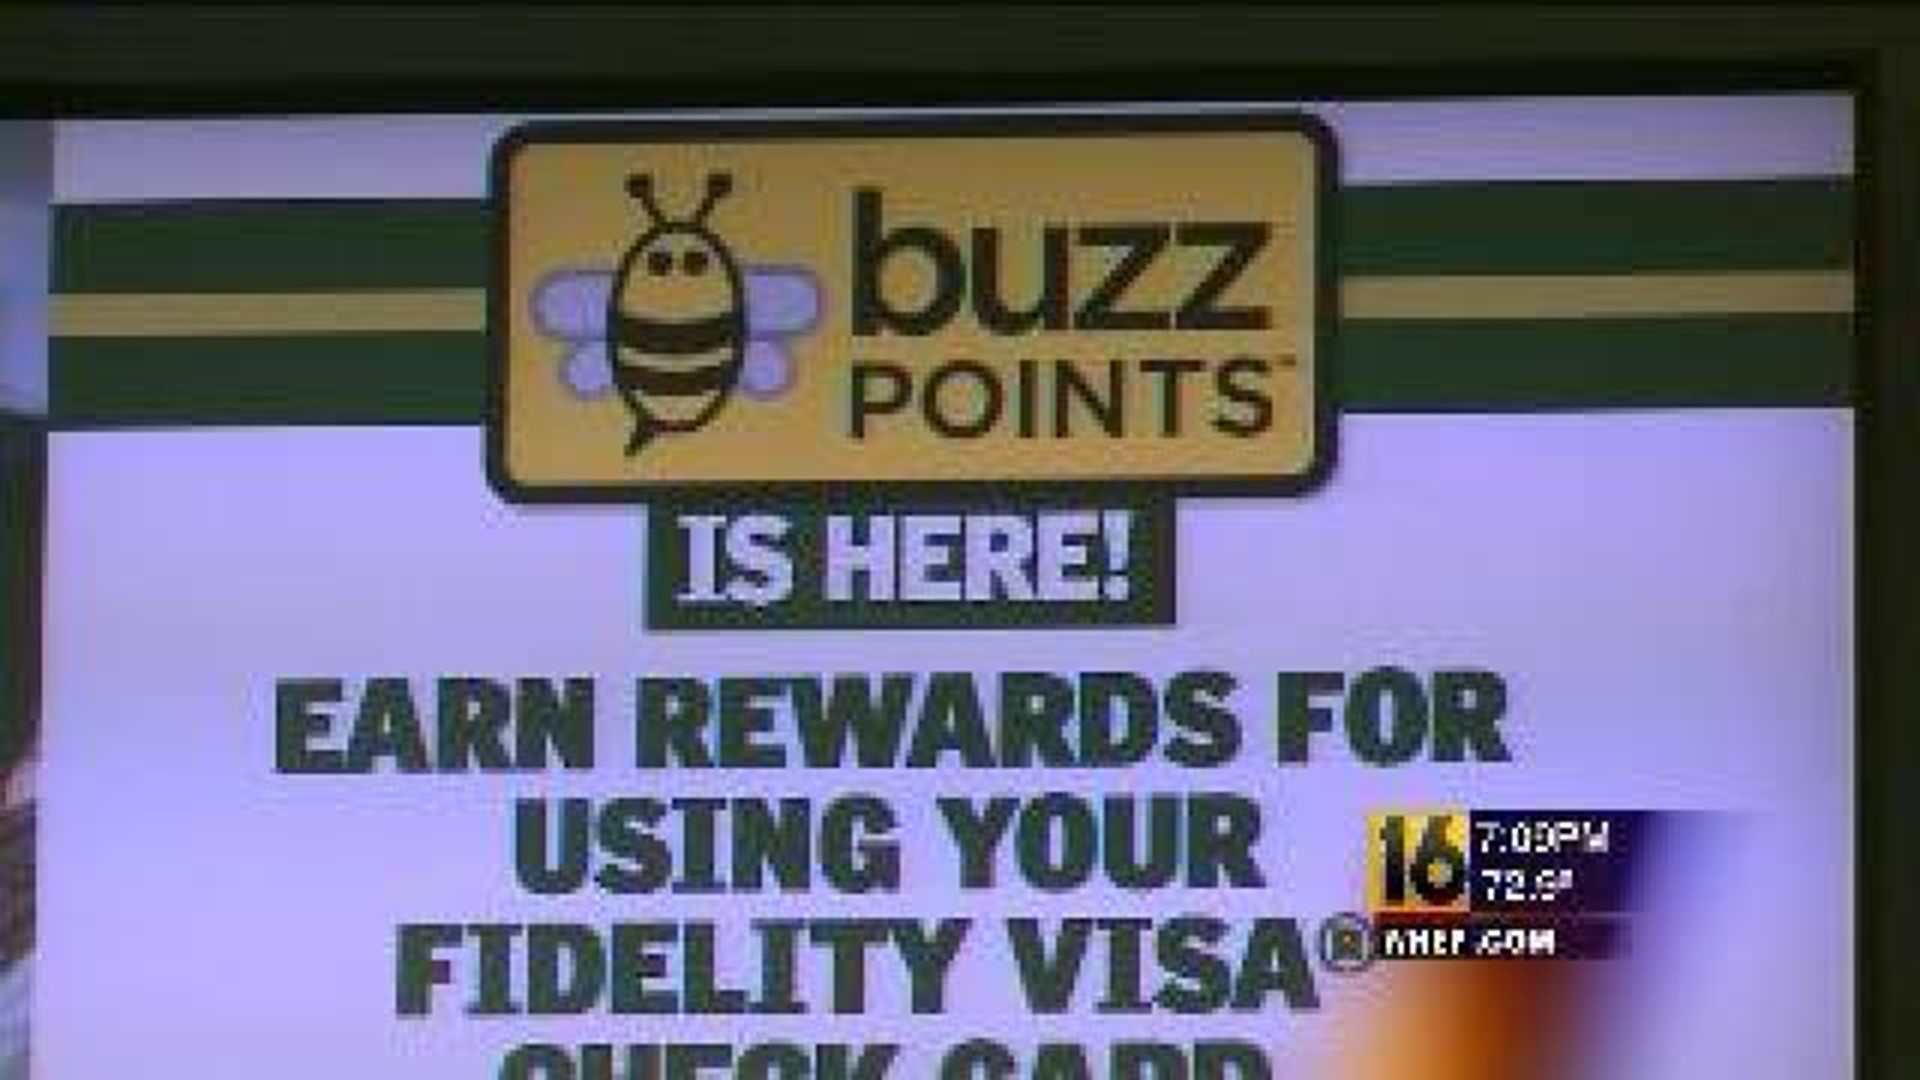 "Buzz Points" Bank On Local Businesses